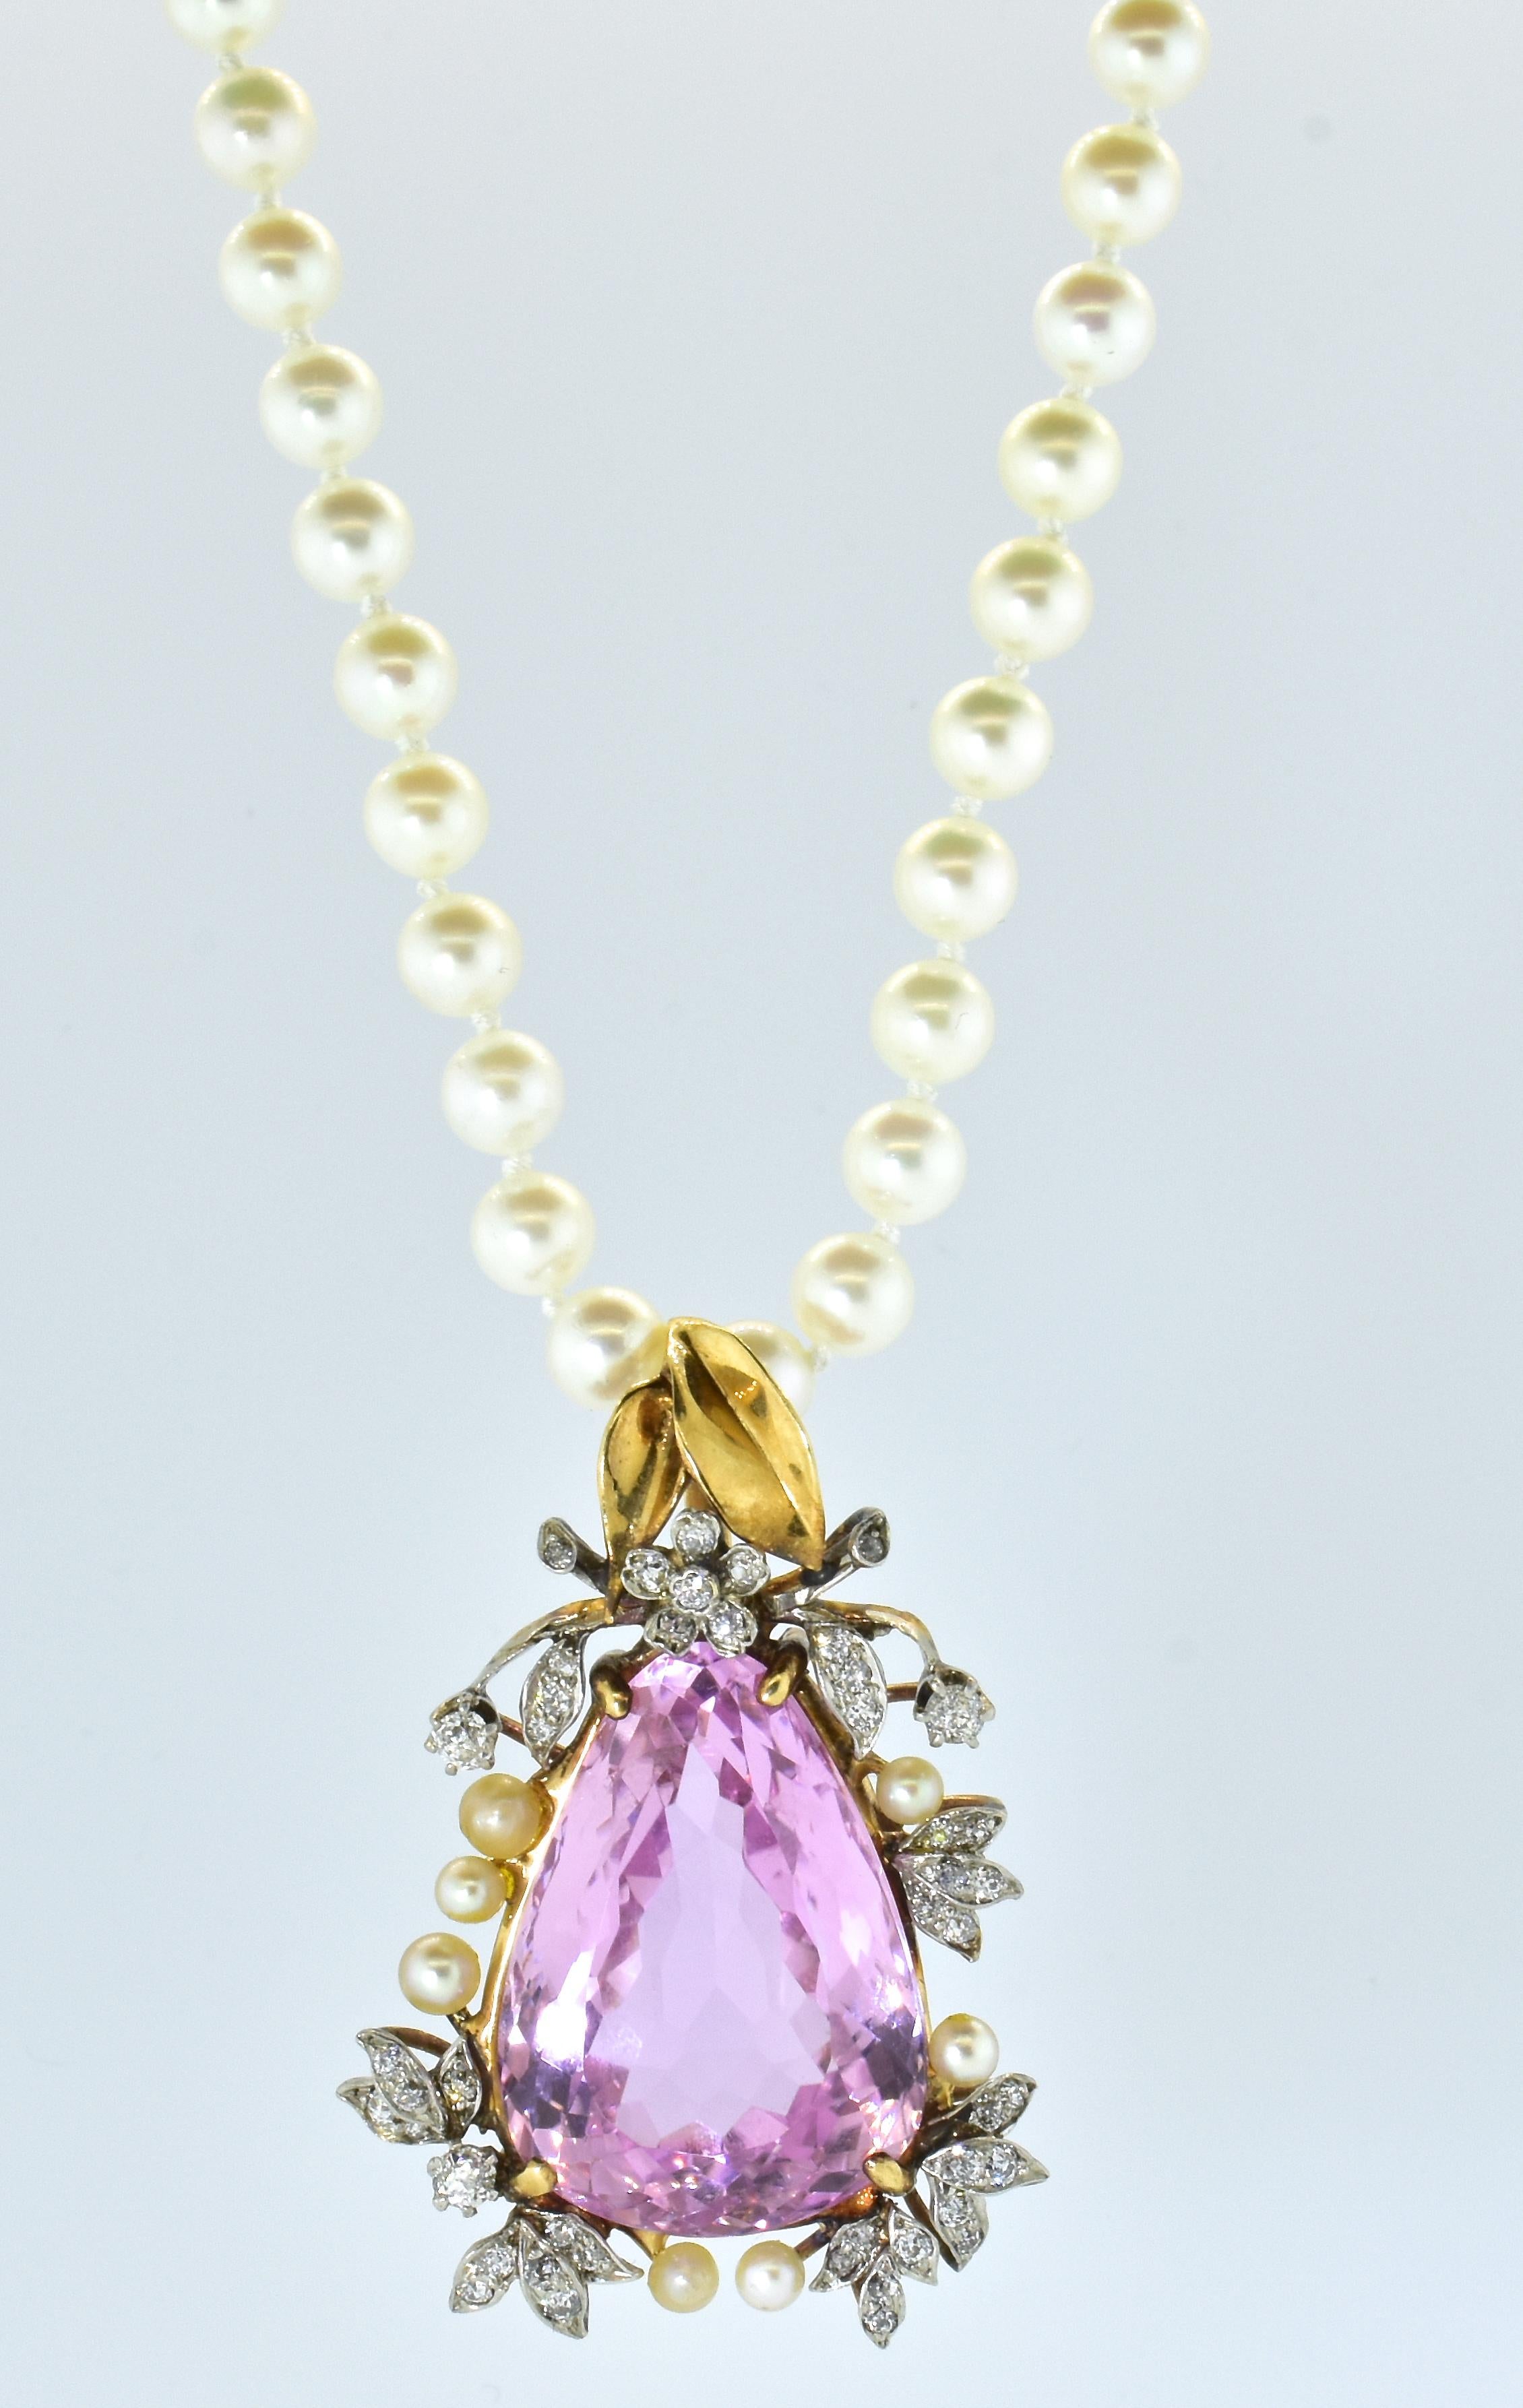 Diamond, Kunzite and Pearl Ring, Earrings and Necklace All in Gold & Platinum 10